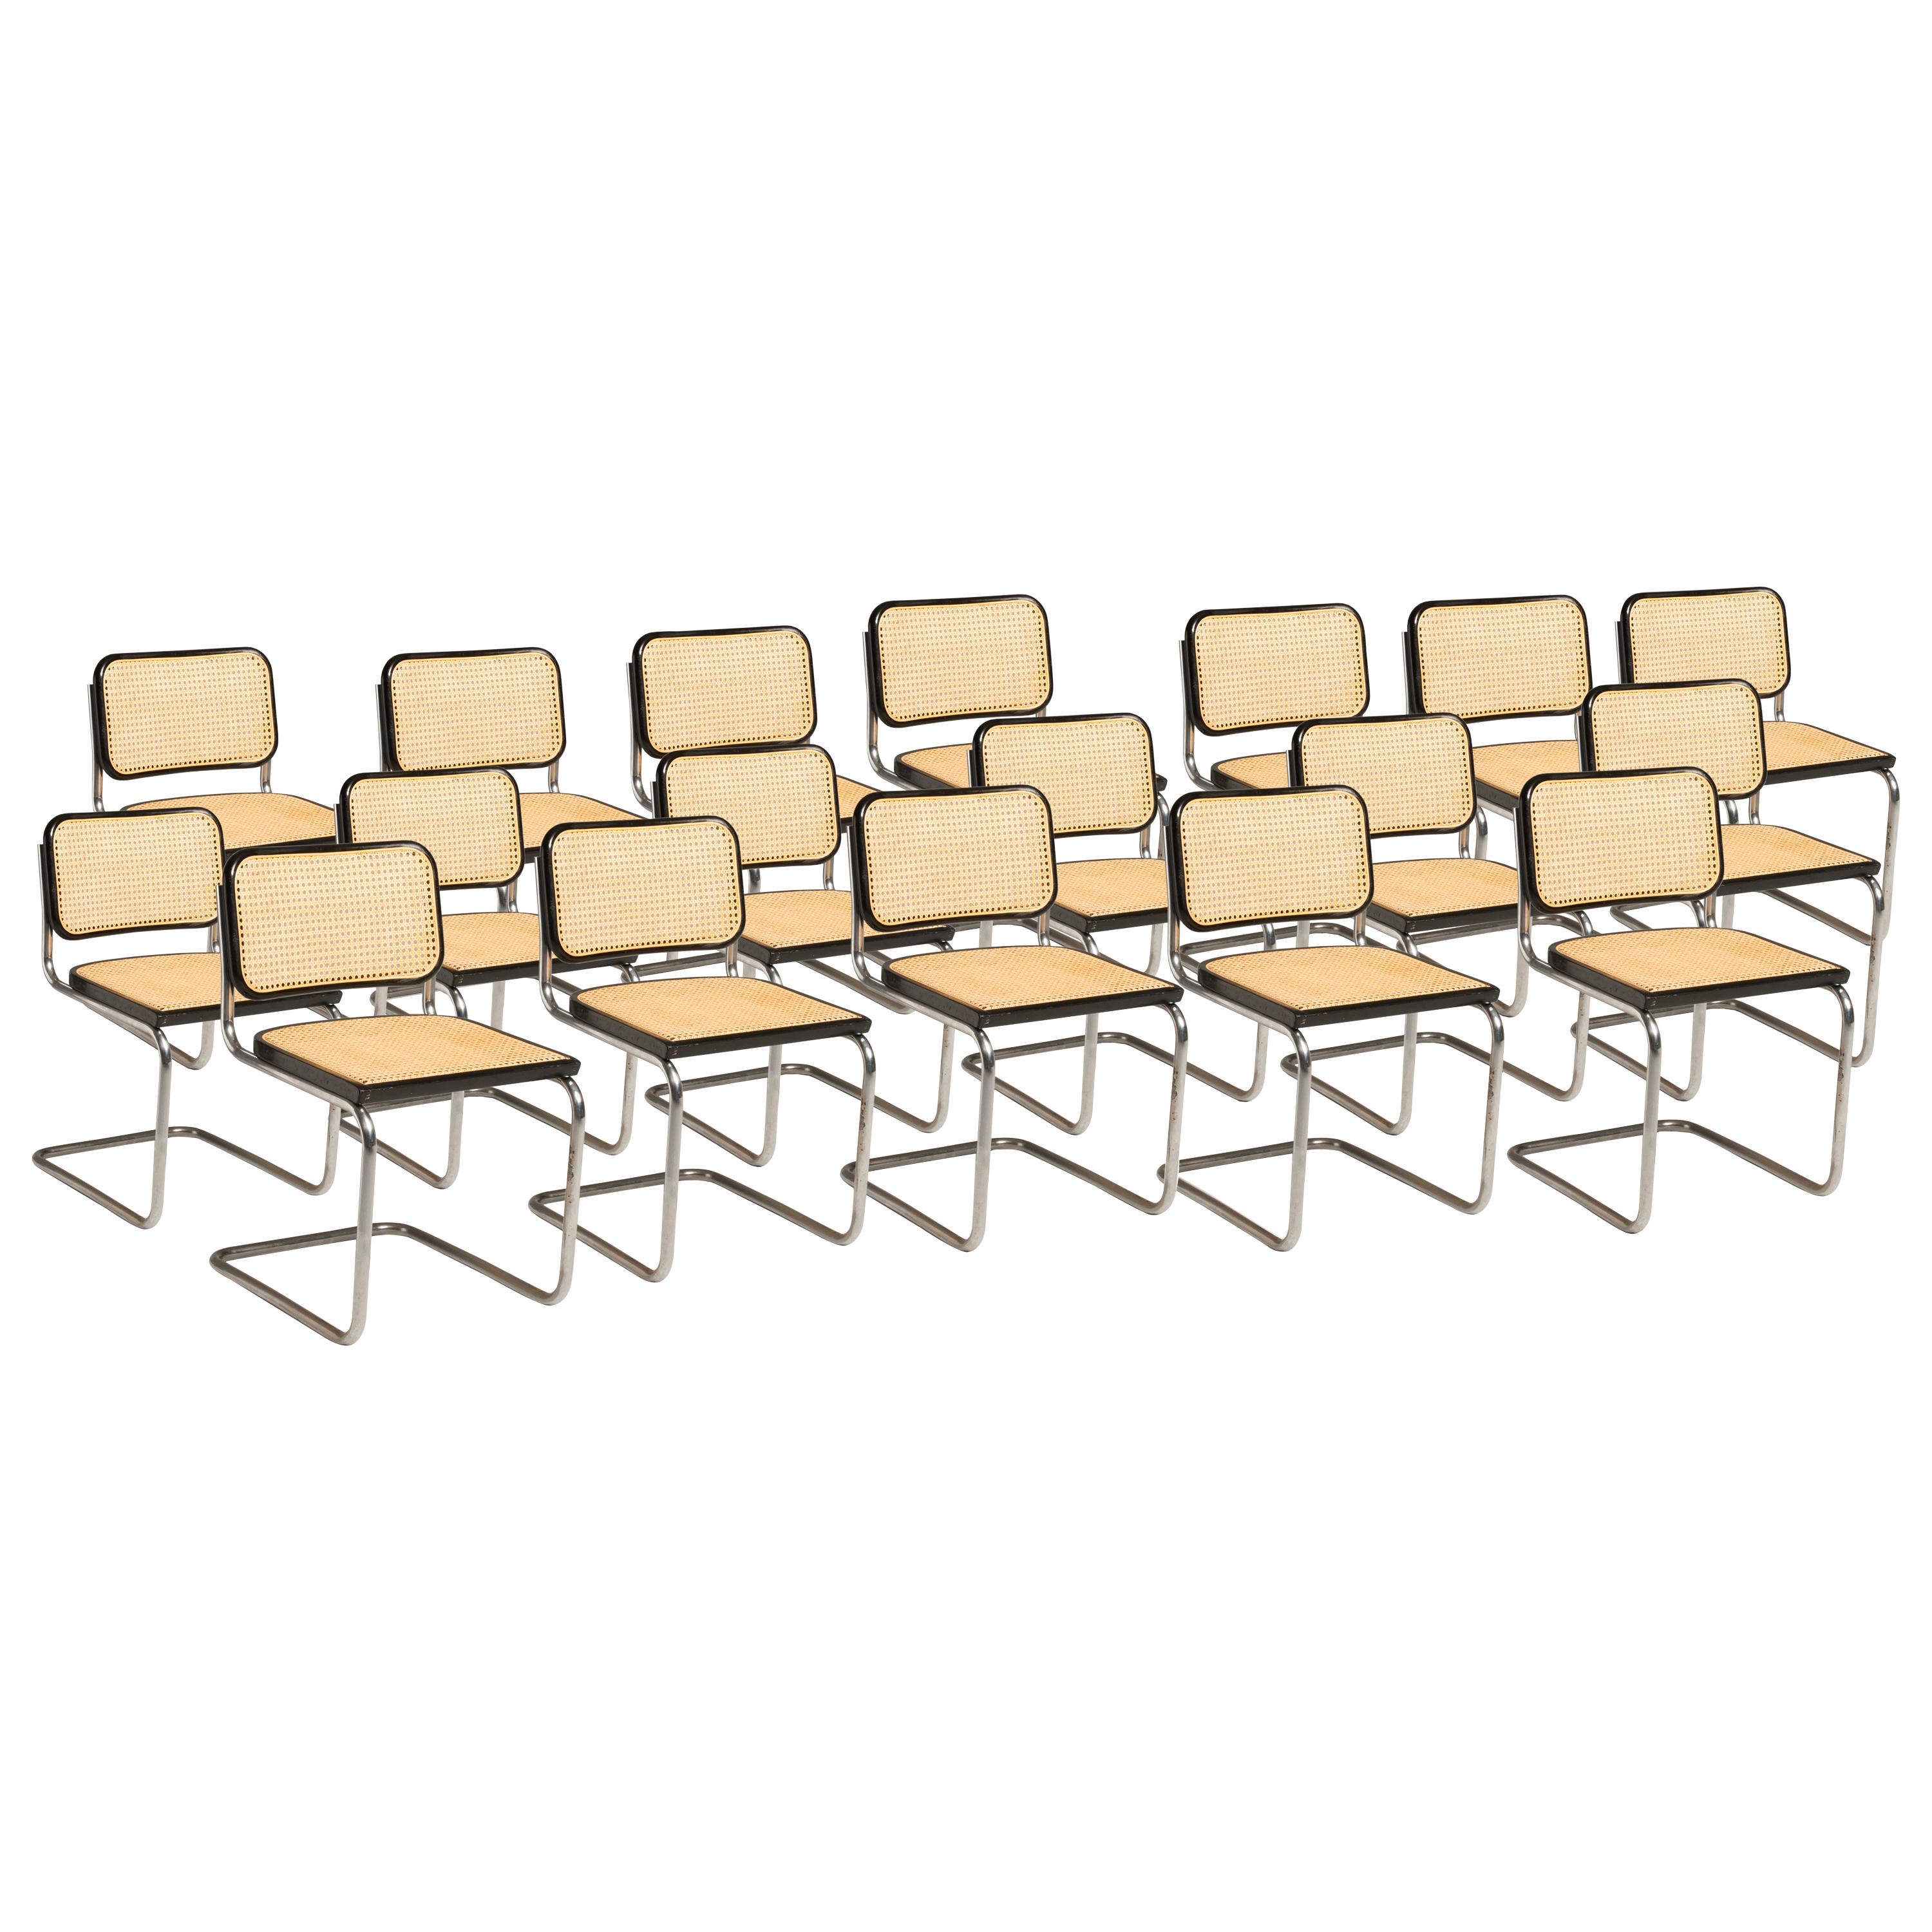 Bauhaus Marcel Breuer Cesca Chairs for Knoll Production, 8 Chairs Available